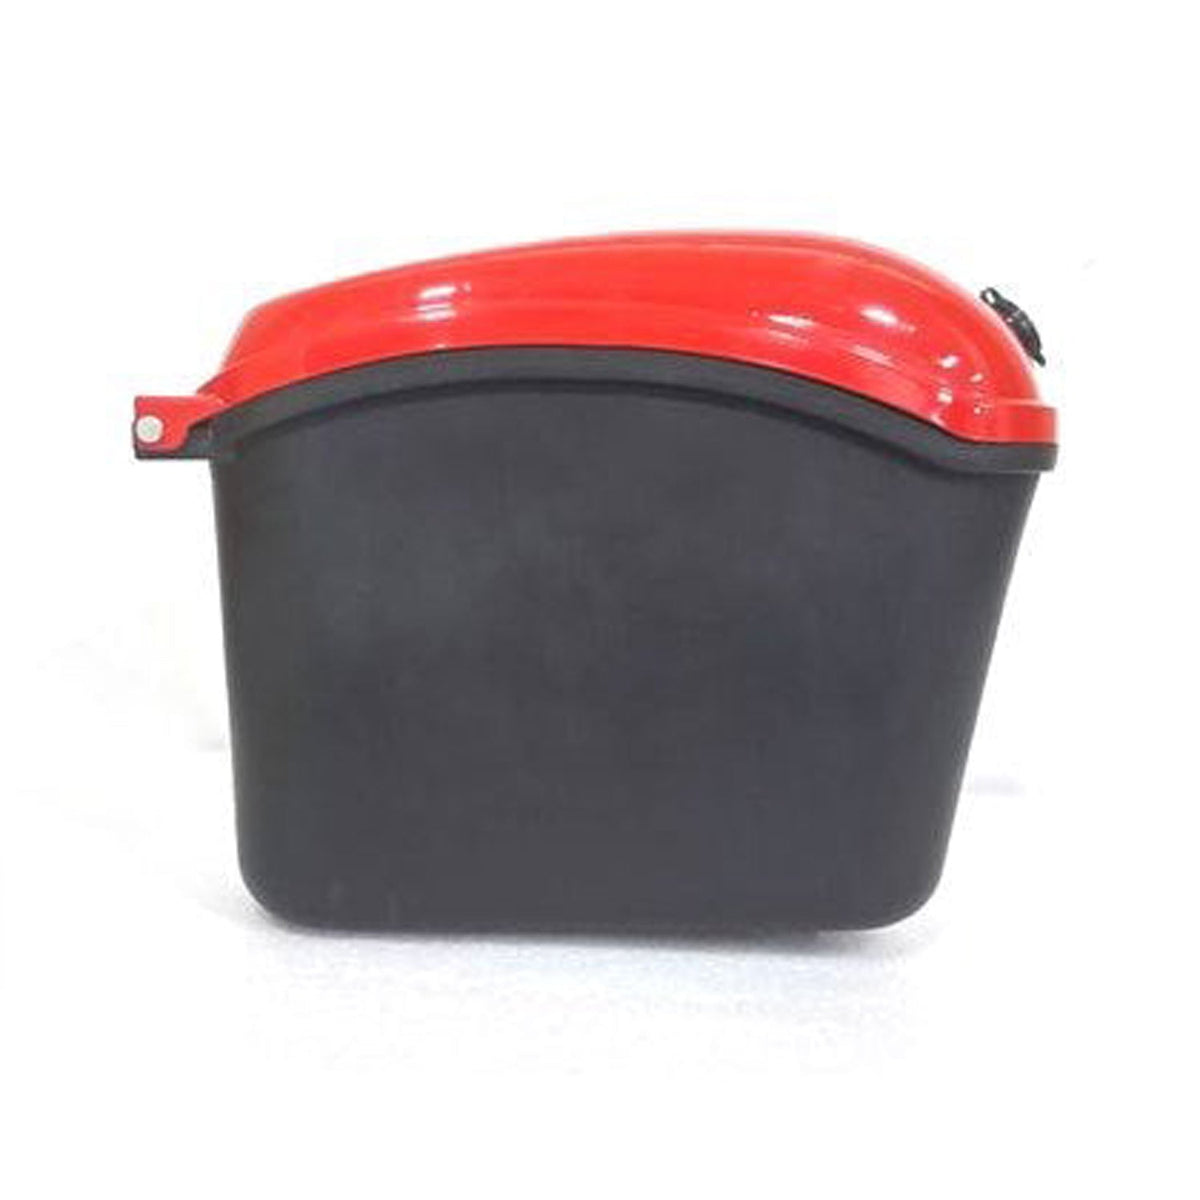 Steelbird SB-512 Universal (for All Bikes) Luggage Side Box with Fitment Clamps (Red & Black)